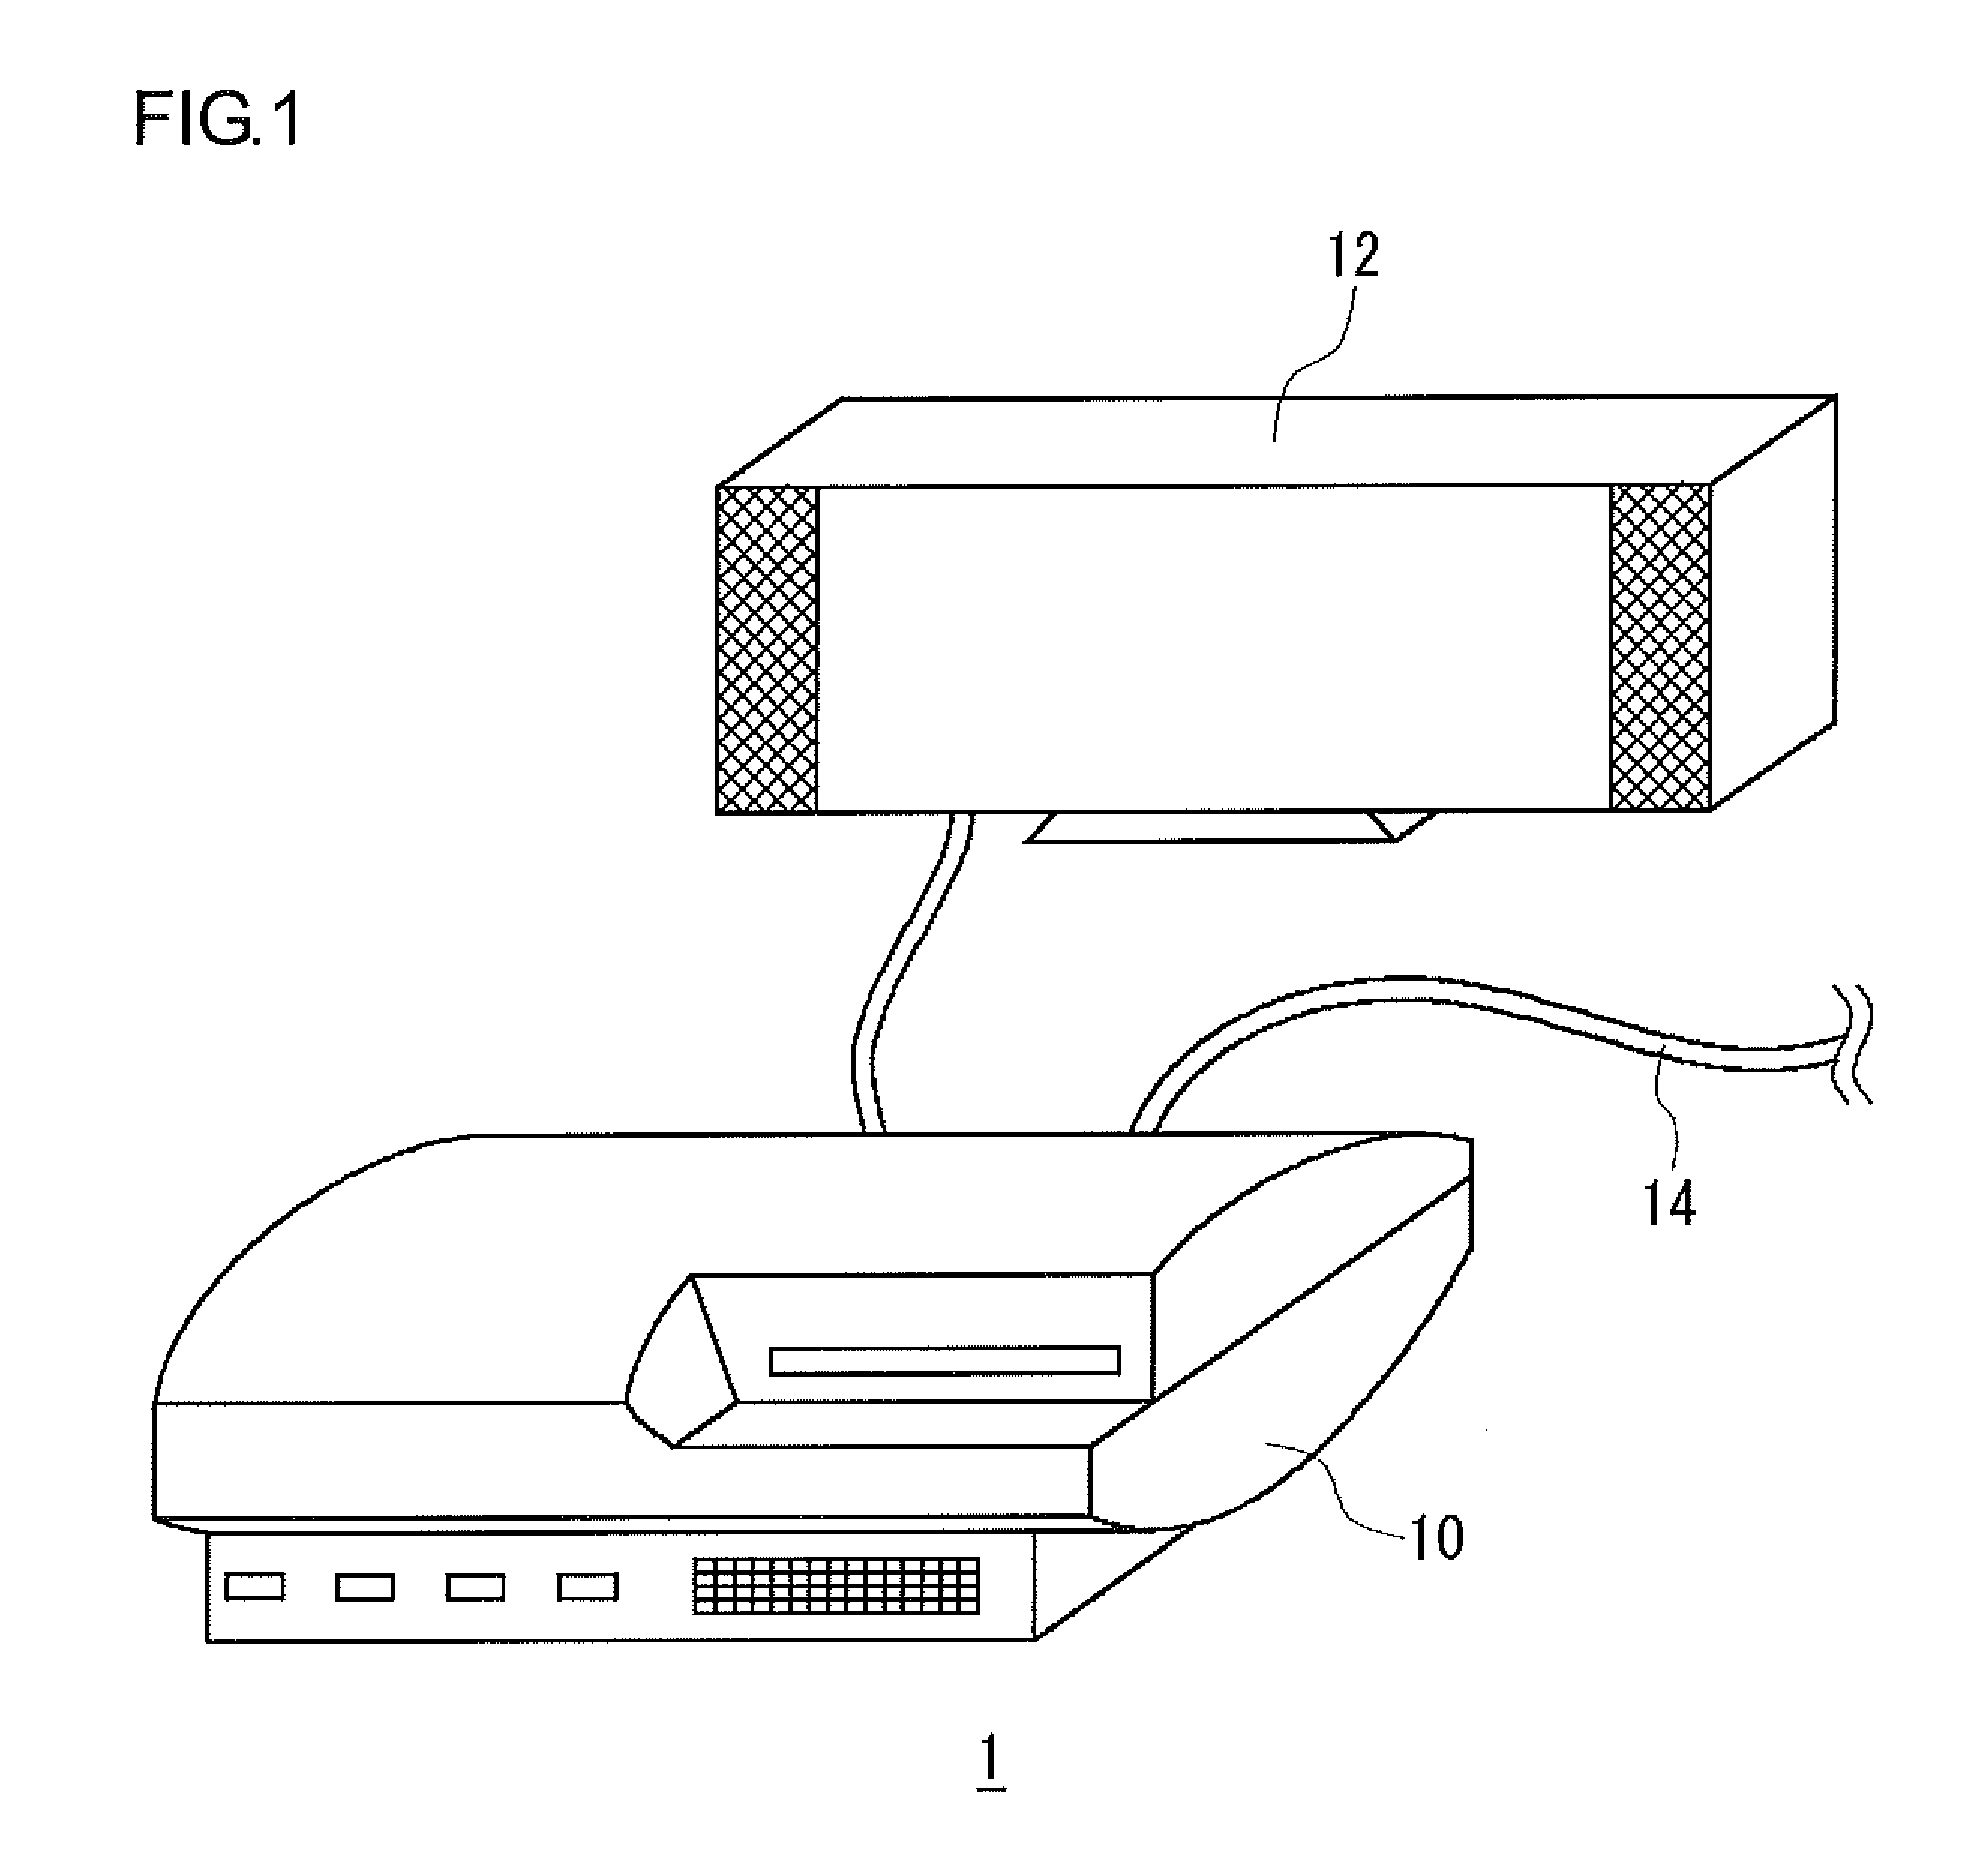 Image file generation device, image processing device, image file generation method, image processing method, and data structure for image files